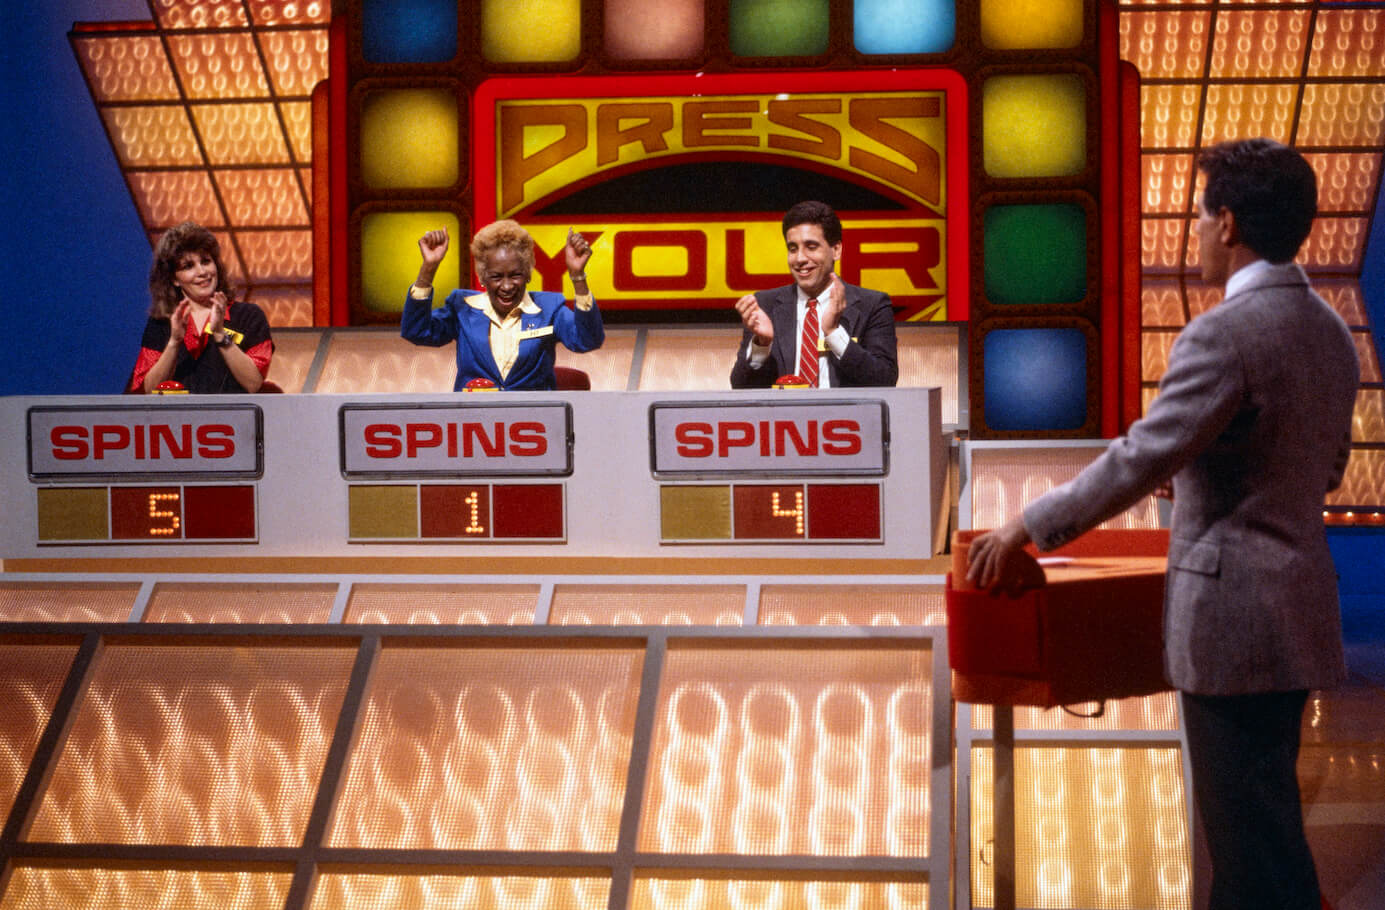 'Press Your Luck' What Happened to the Original Host, Peter Tomarken?